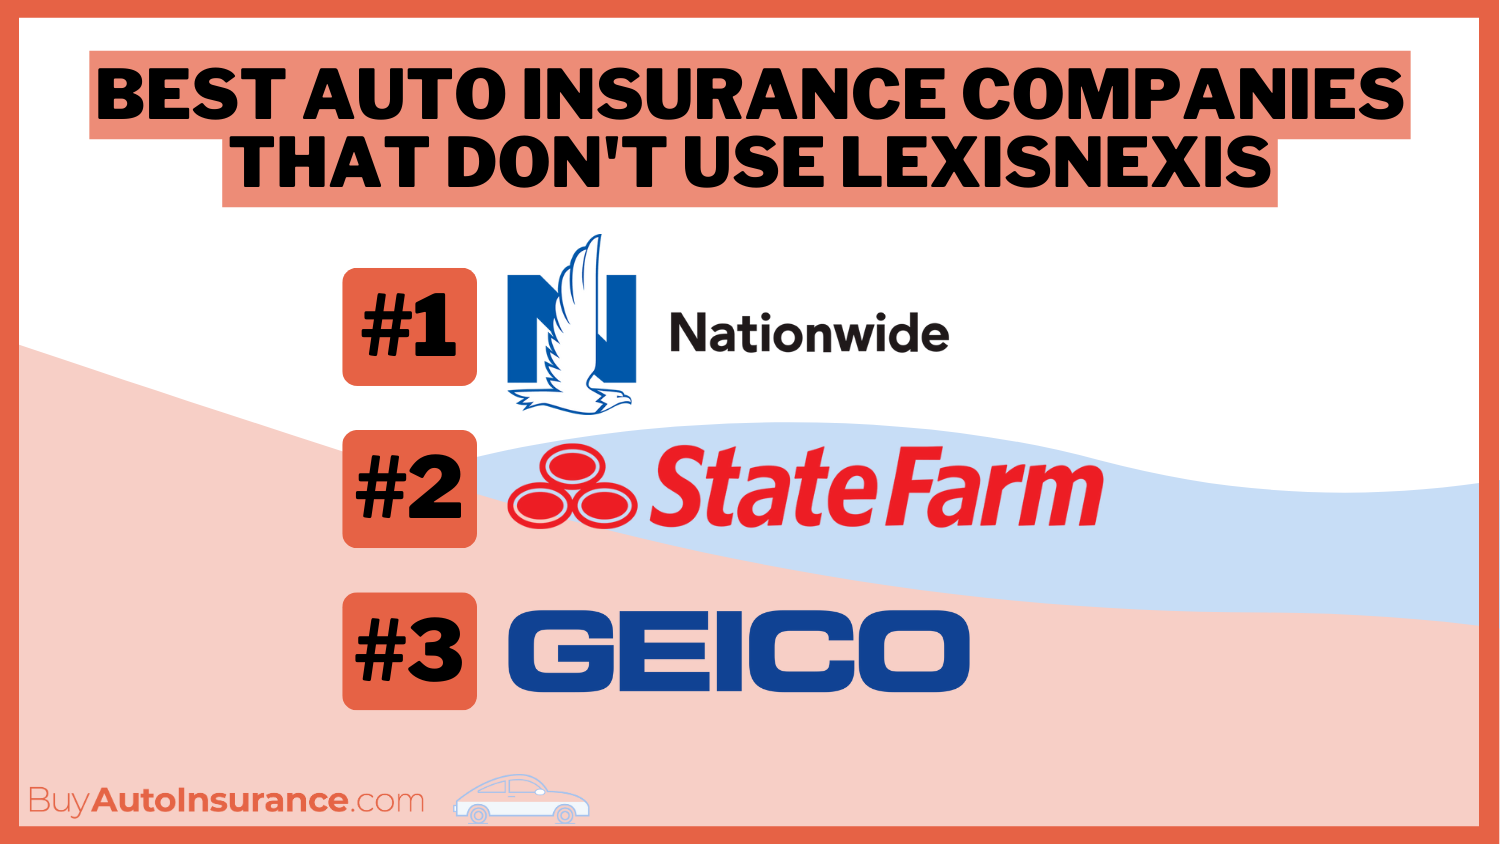 Nationwide, State Farm, Geico: Best auto insurance companies that don't use LexisNexis